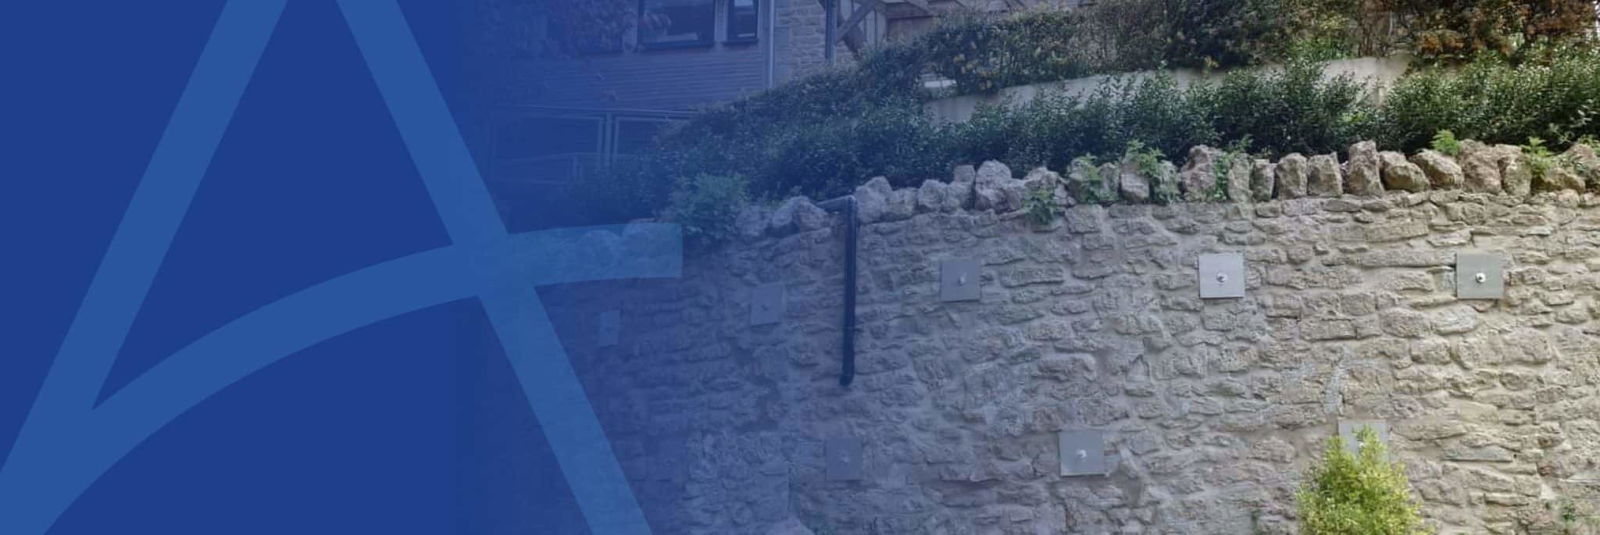 banner image showing stone retaining wall stabilised with ground anchors